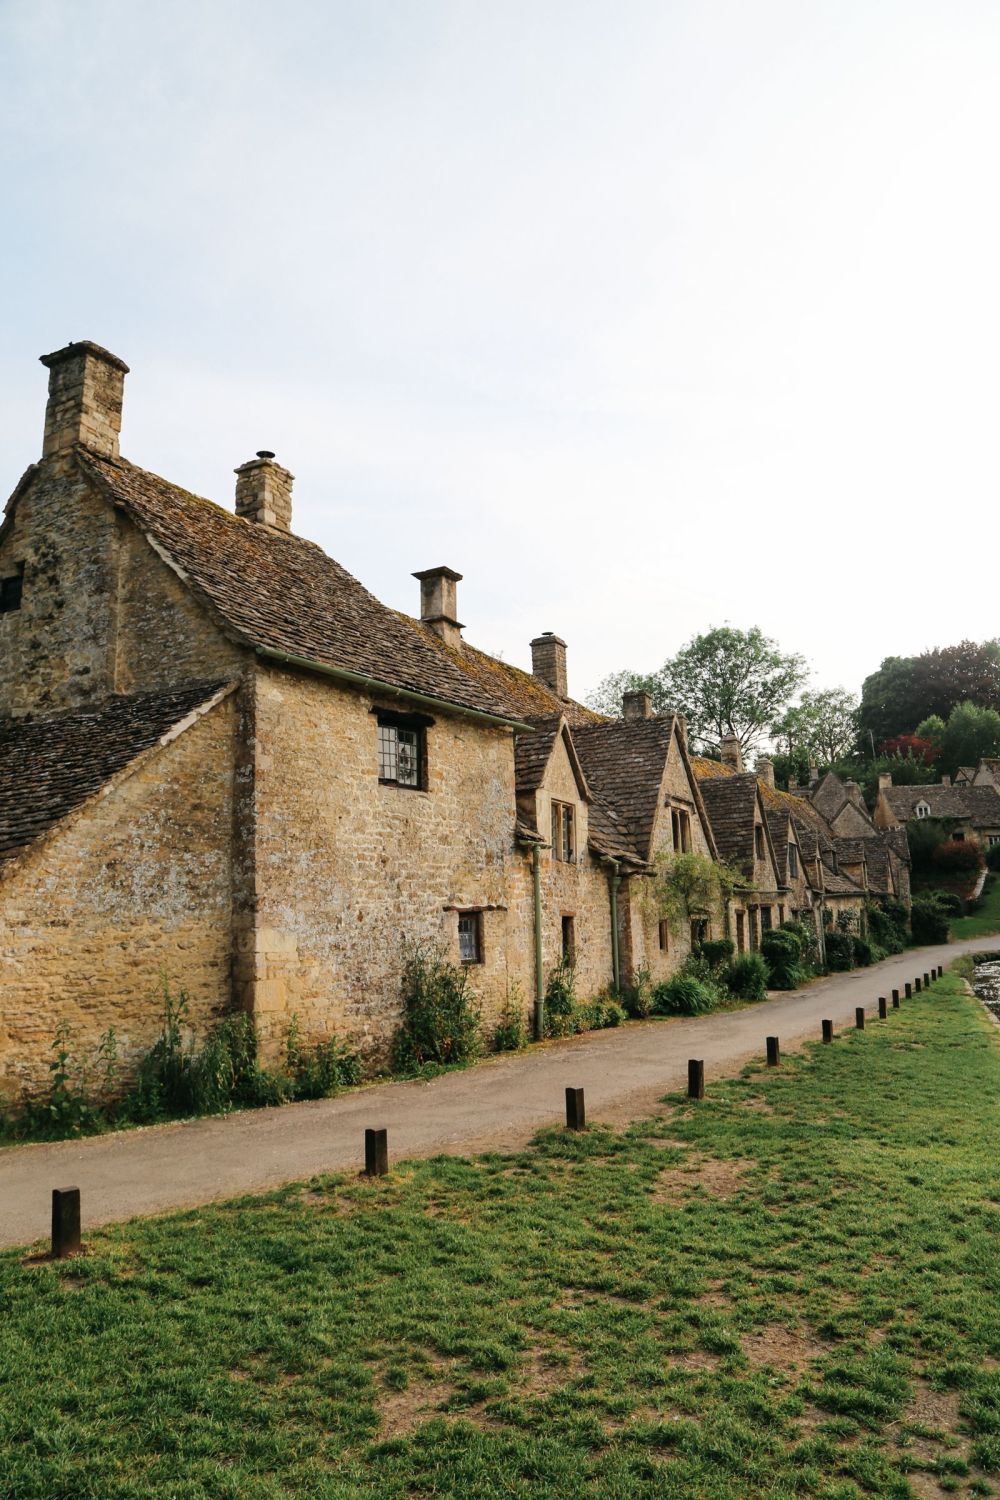 In Search Of The Most Beautiful Street In England - Arlington Row, Bibury (8)